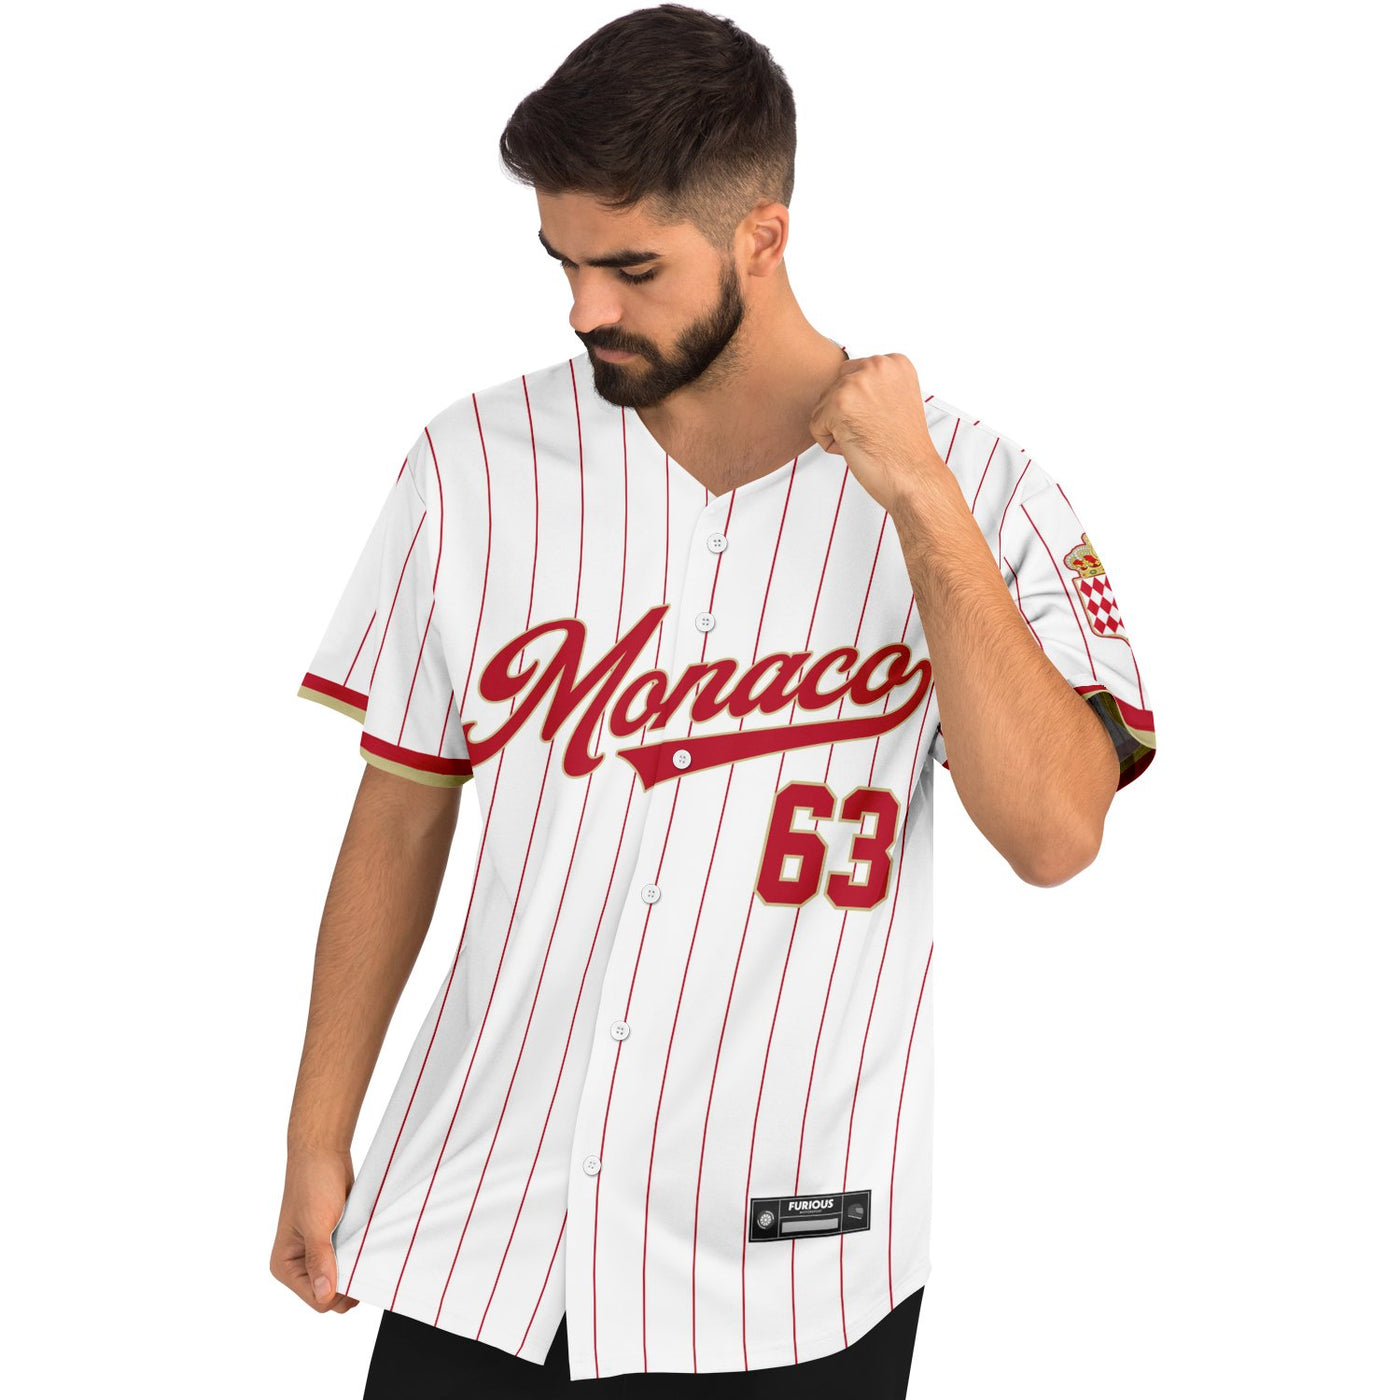 Russell - Monaco Jersey (Clearance) - Furious Motorsport